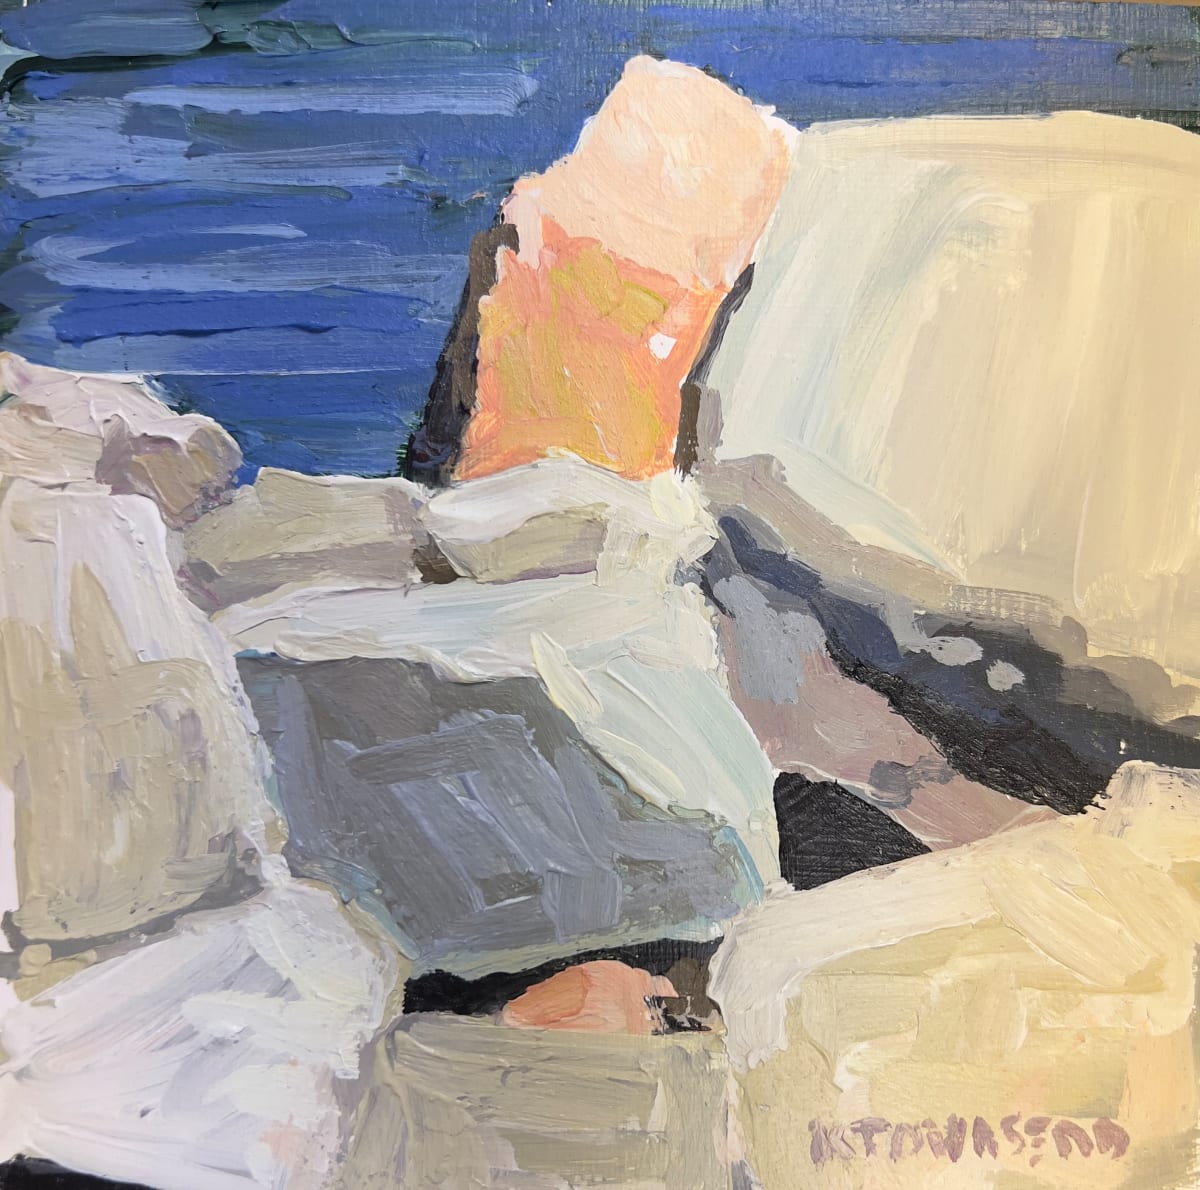 Rock Beach Study by Krista Townsend  Image: File for Glave Kocen